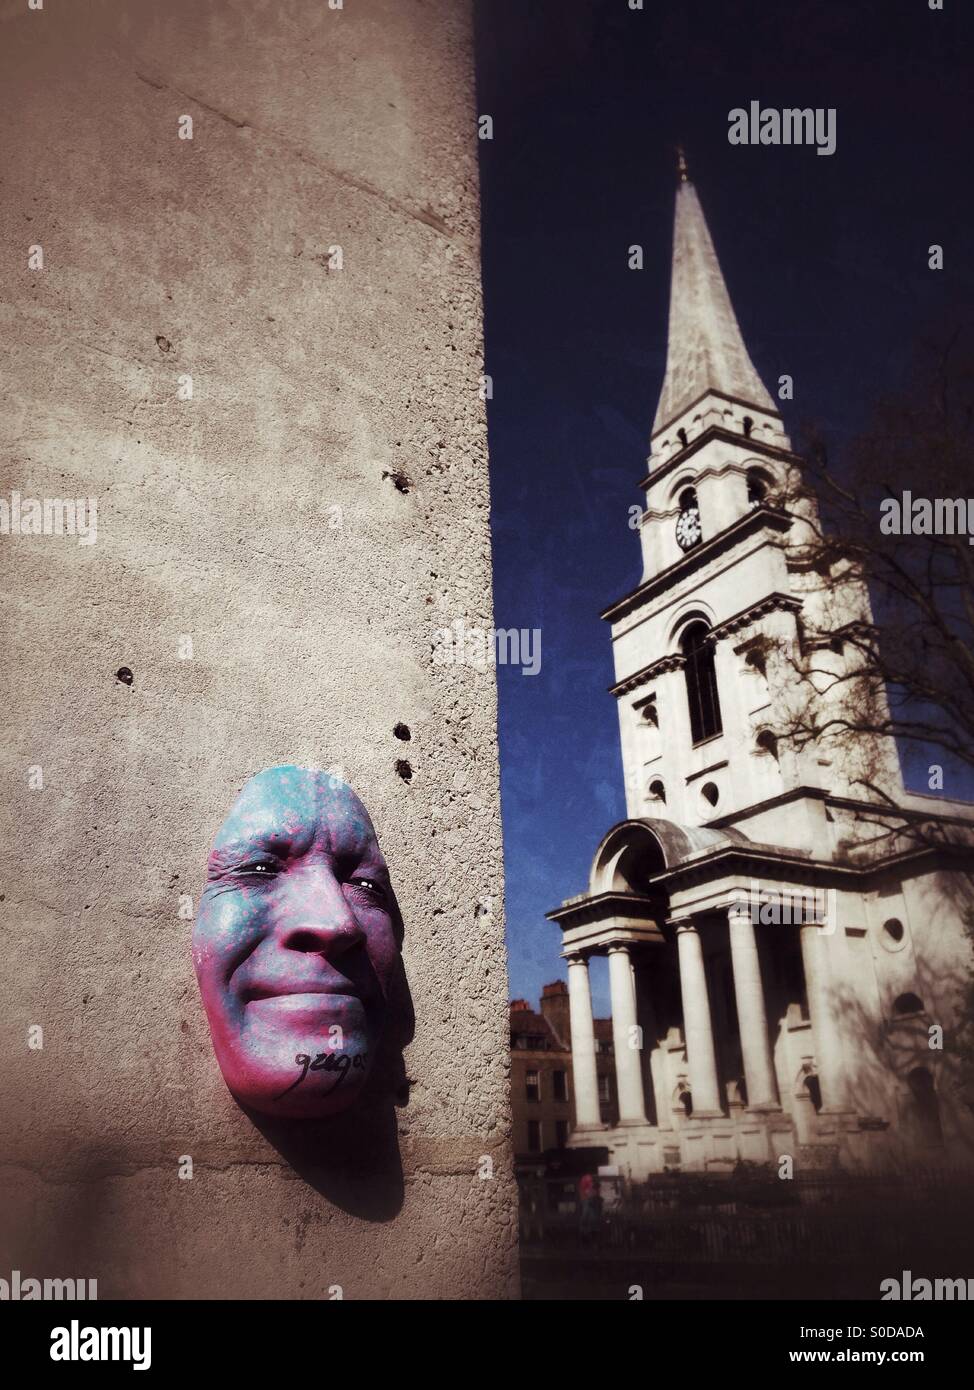 Face sculpture by French street artist Gregos with Christ Church Spitalfields in the background. Spitalfields, London. UK. Stock Photo